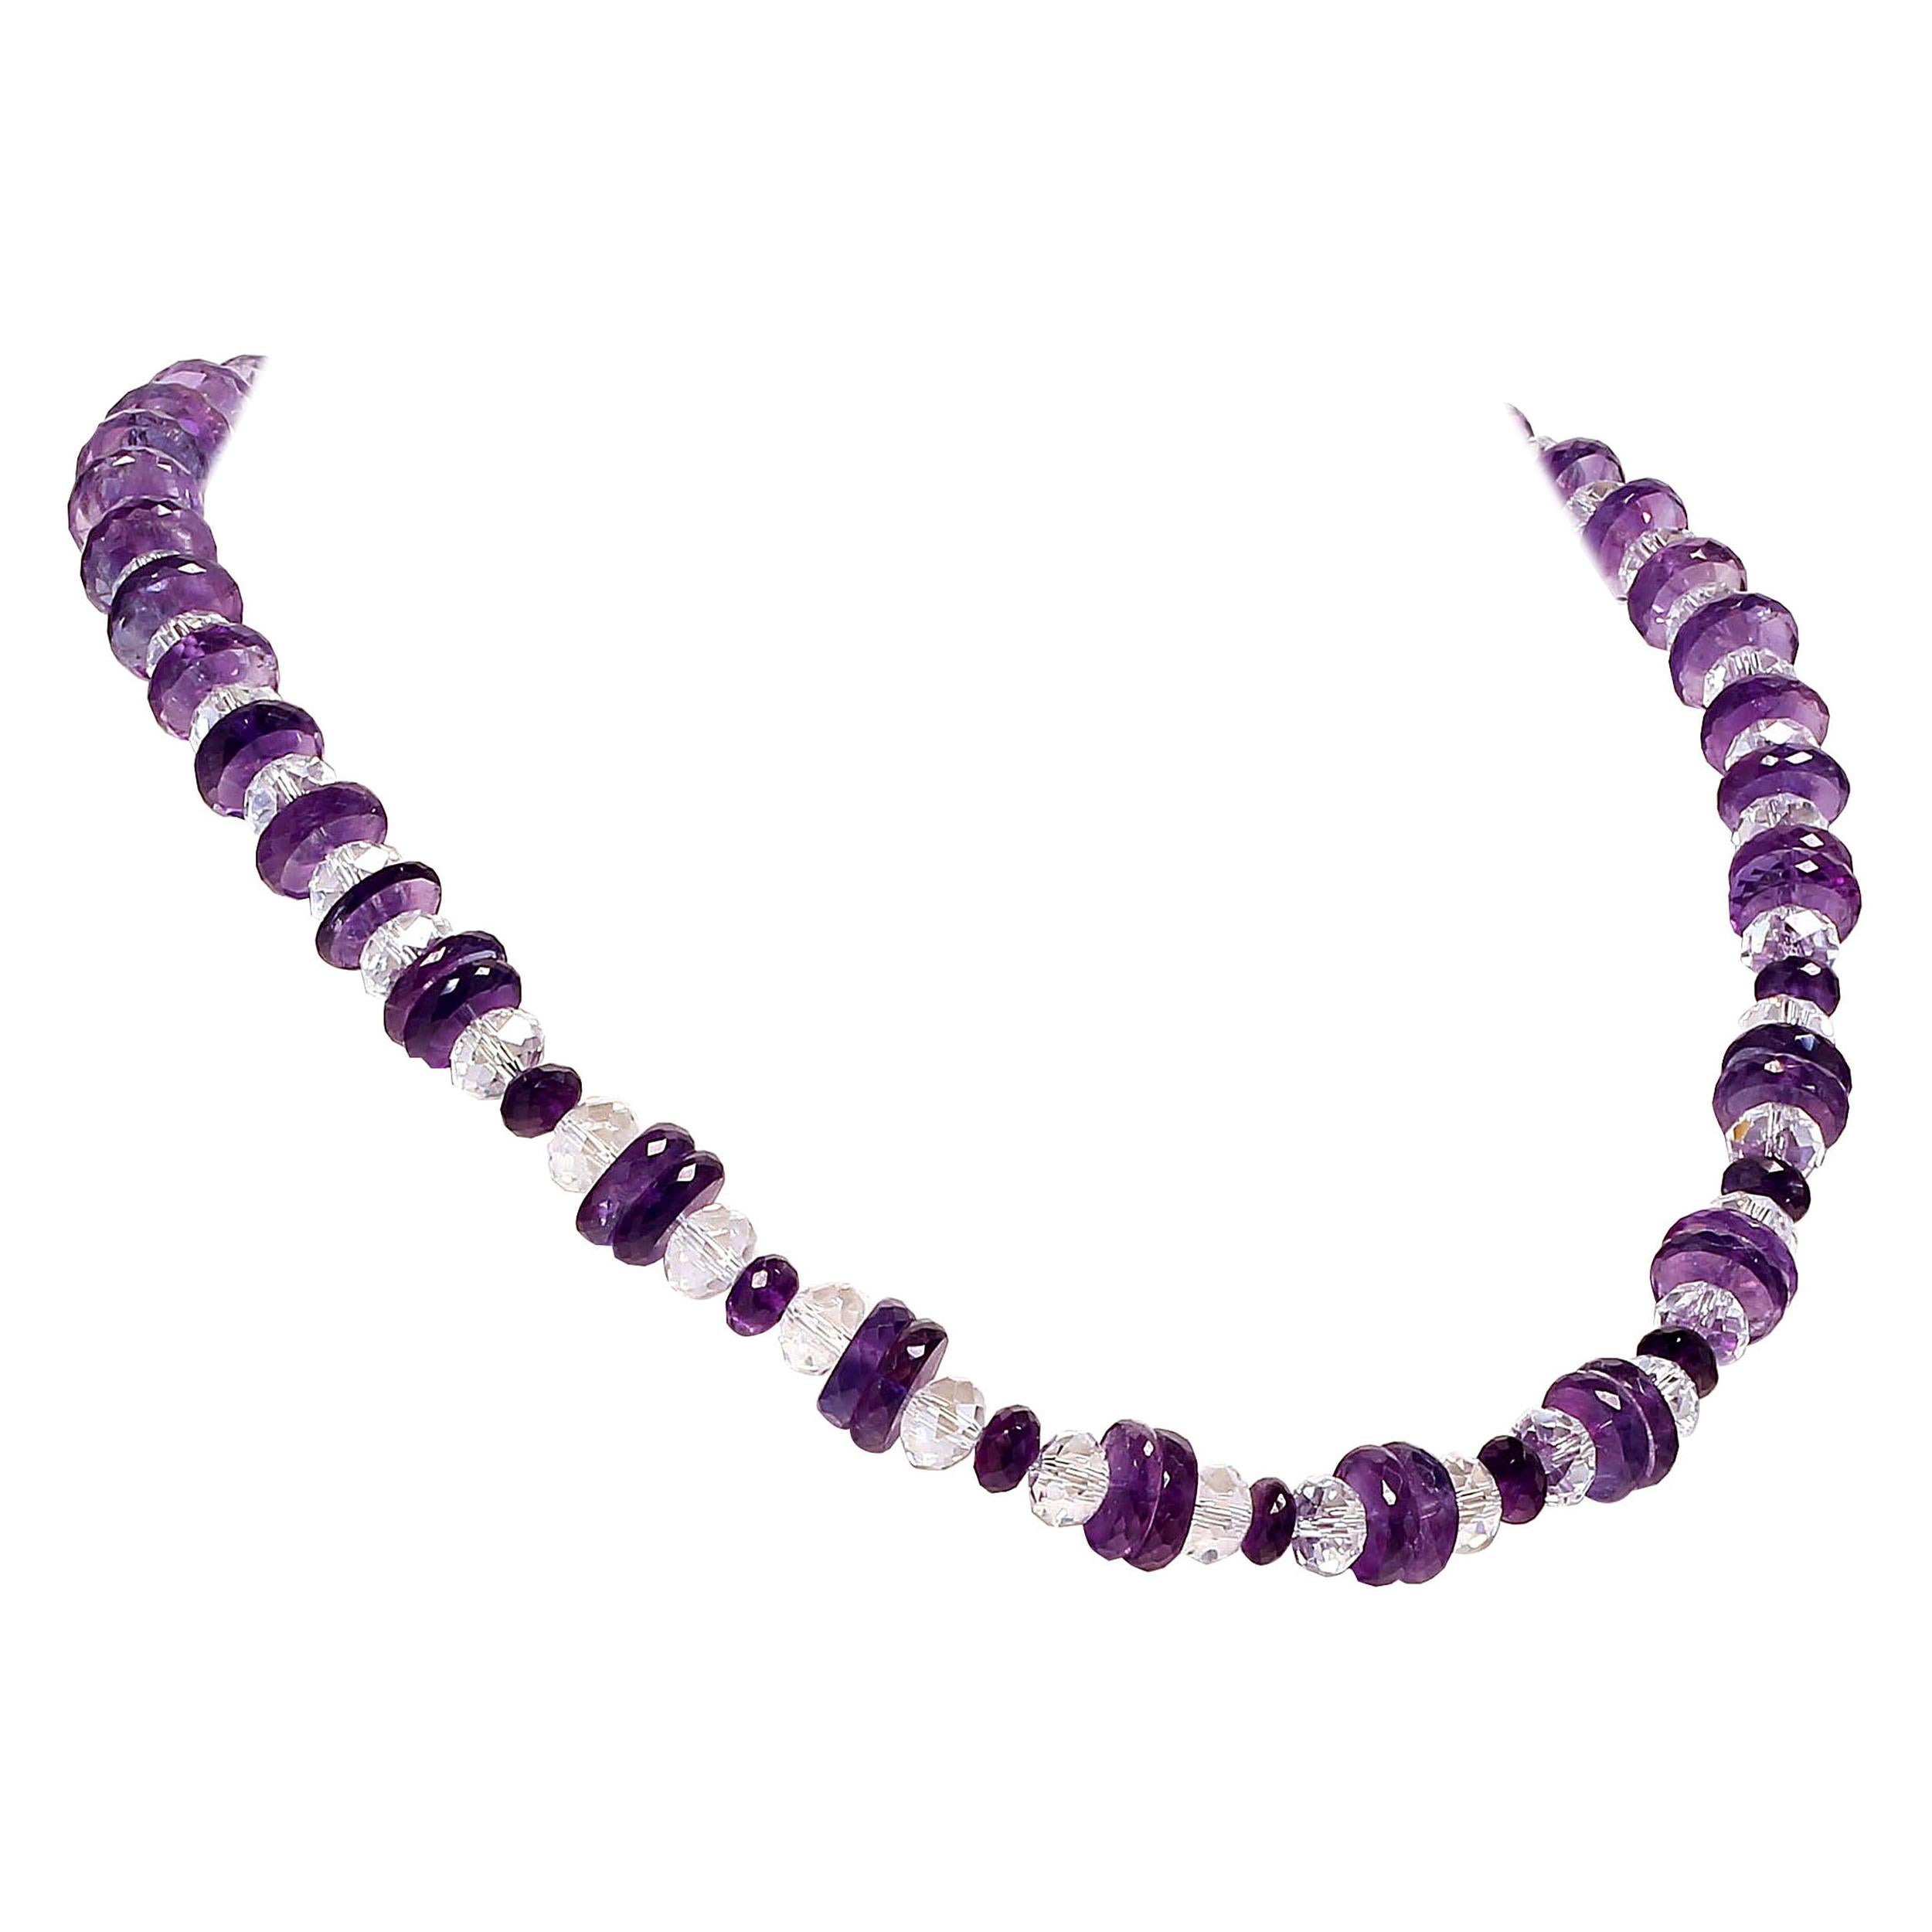 Custom made necklace of Sparkling Amethyst slices combined with faceted fat Crystal rondelles.  This necklace features lovely bright and lively Amethyst slices which have faceted edges and flat sides combined brilliant crystals.  The Amethyst slices